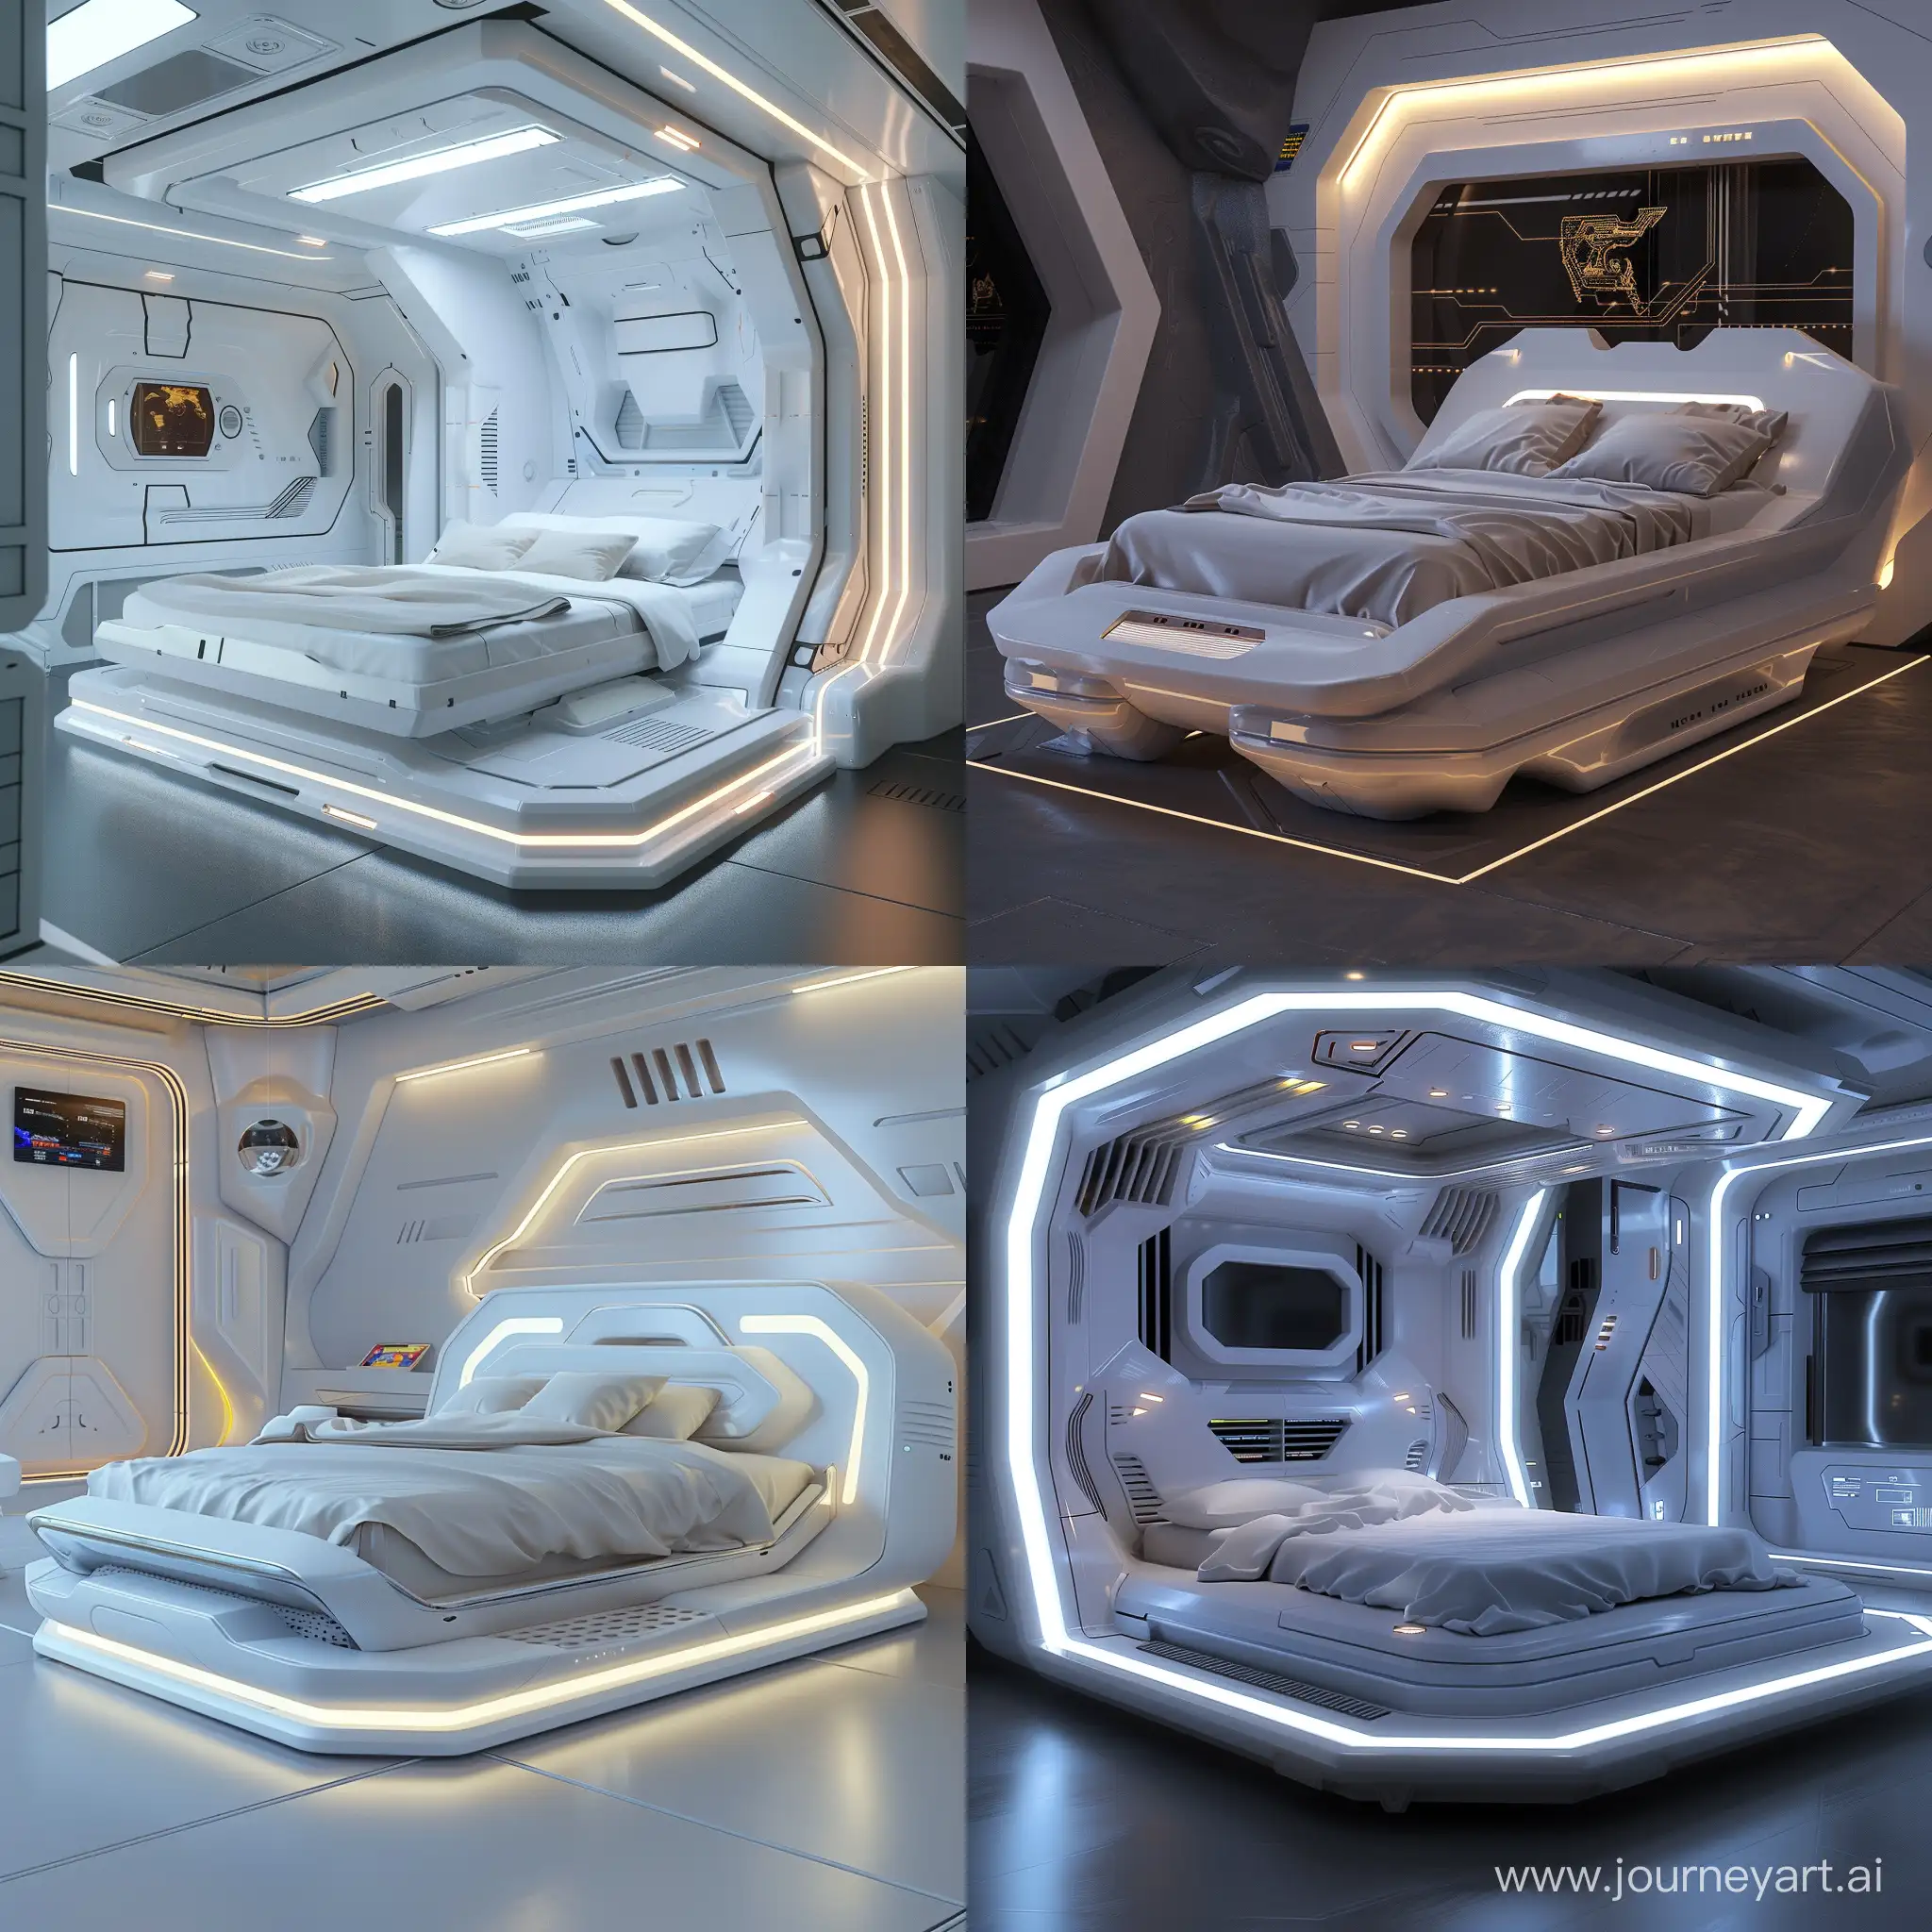 Futuristic-Recyclable-Bed-in-a-HighTech-World